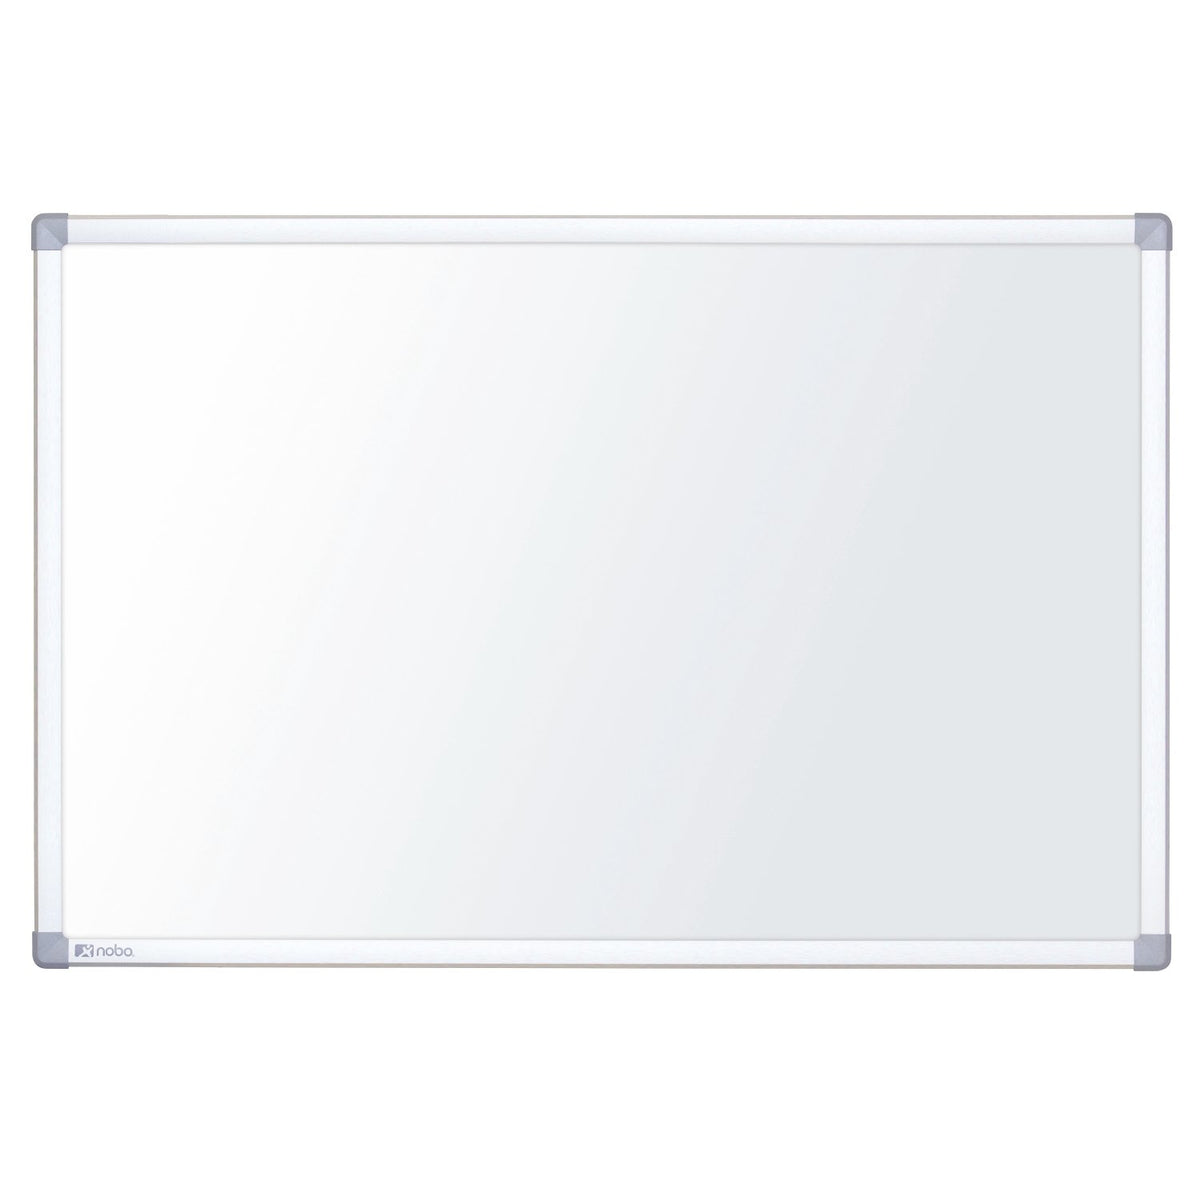 Nobo Nano Clean - White board - wall mountable - 2100 x 1200 mm - painted steel - magnetic - white - silver aluminum frame